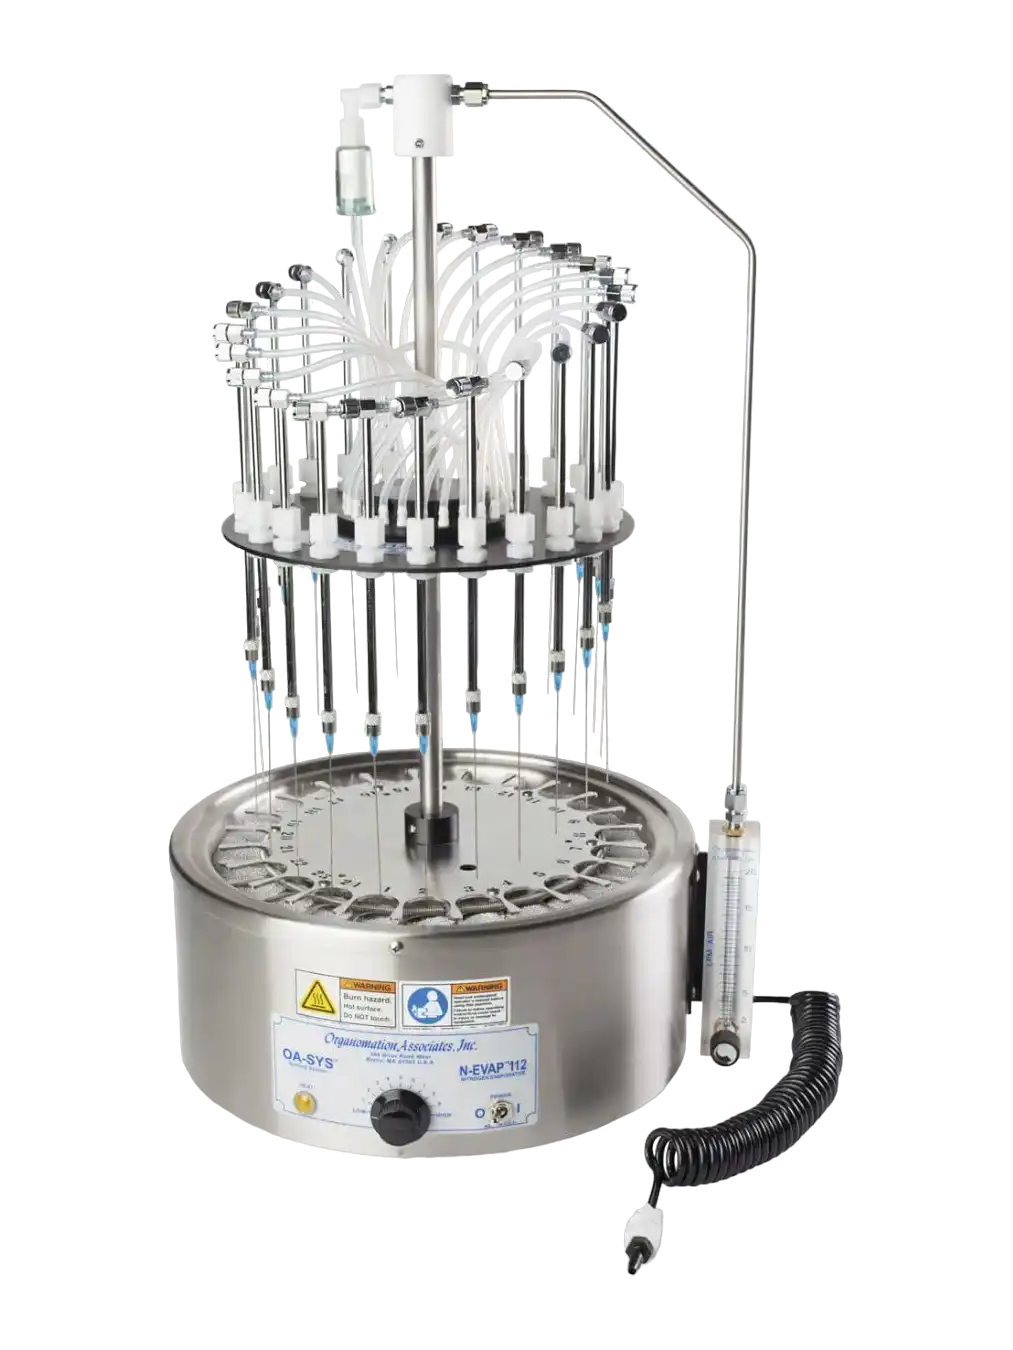 Nitrogen Evaporator, N-EVAP Series, Standard, with Dry Bath (40-130°C and 540 W), Analog Control, 24 Sample Positions